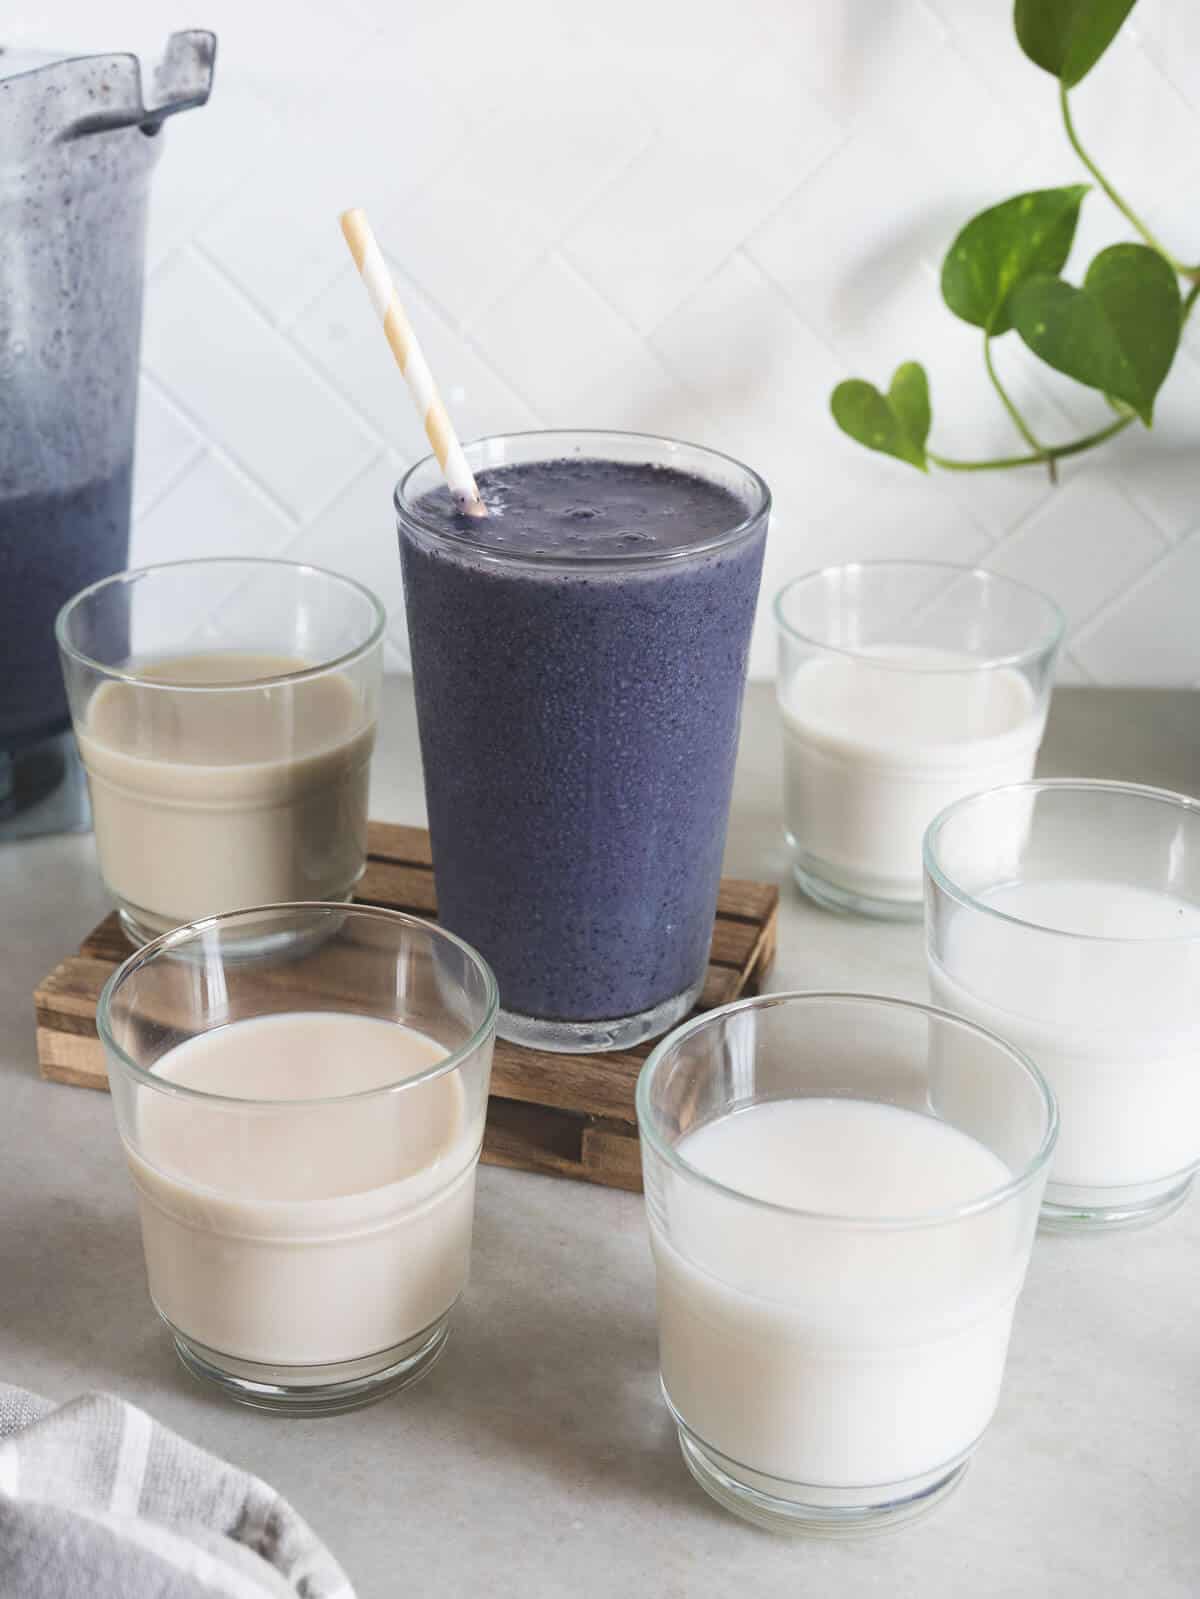 In the center, a vibrant blueberry smoothie in a tall glass with a striped straw stands out against a backdrop of five different glasses of plant milk. The smoothie's rich purple hue suggests a blend of blueberries and plant milk, while the surrounding glasses showcase the variety of milks in shades of white to beige